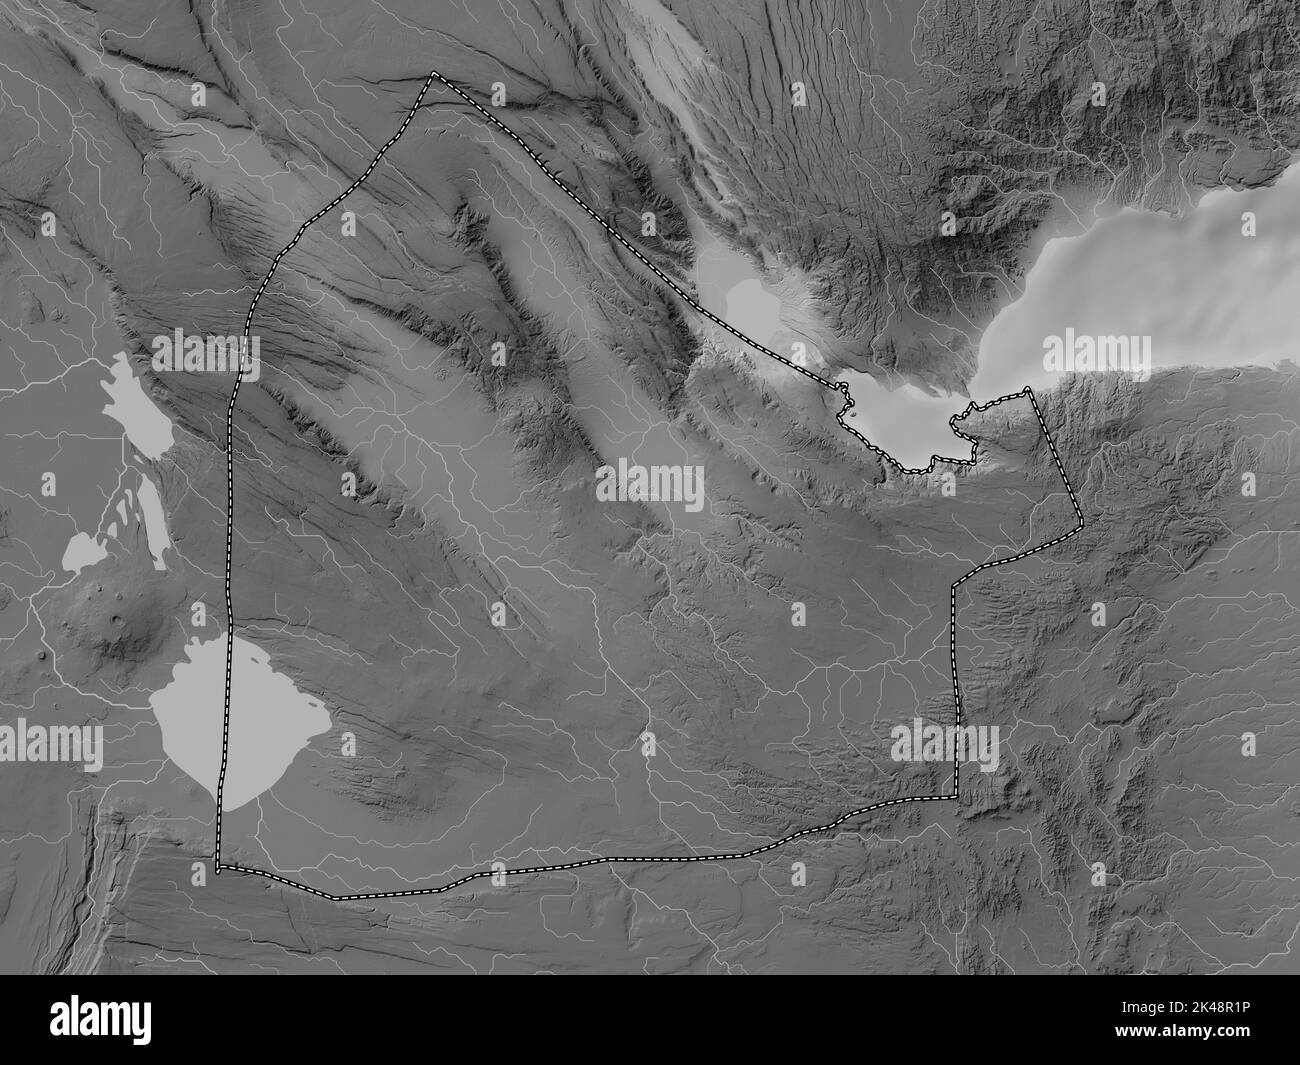 Dikhil, region of Djibouti. Grayscale elevation map with lakes and rivers Stock Photo